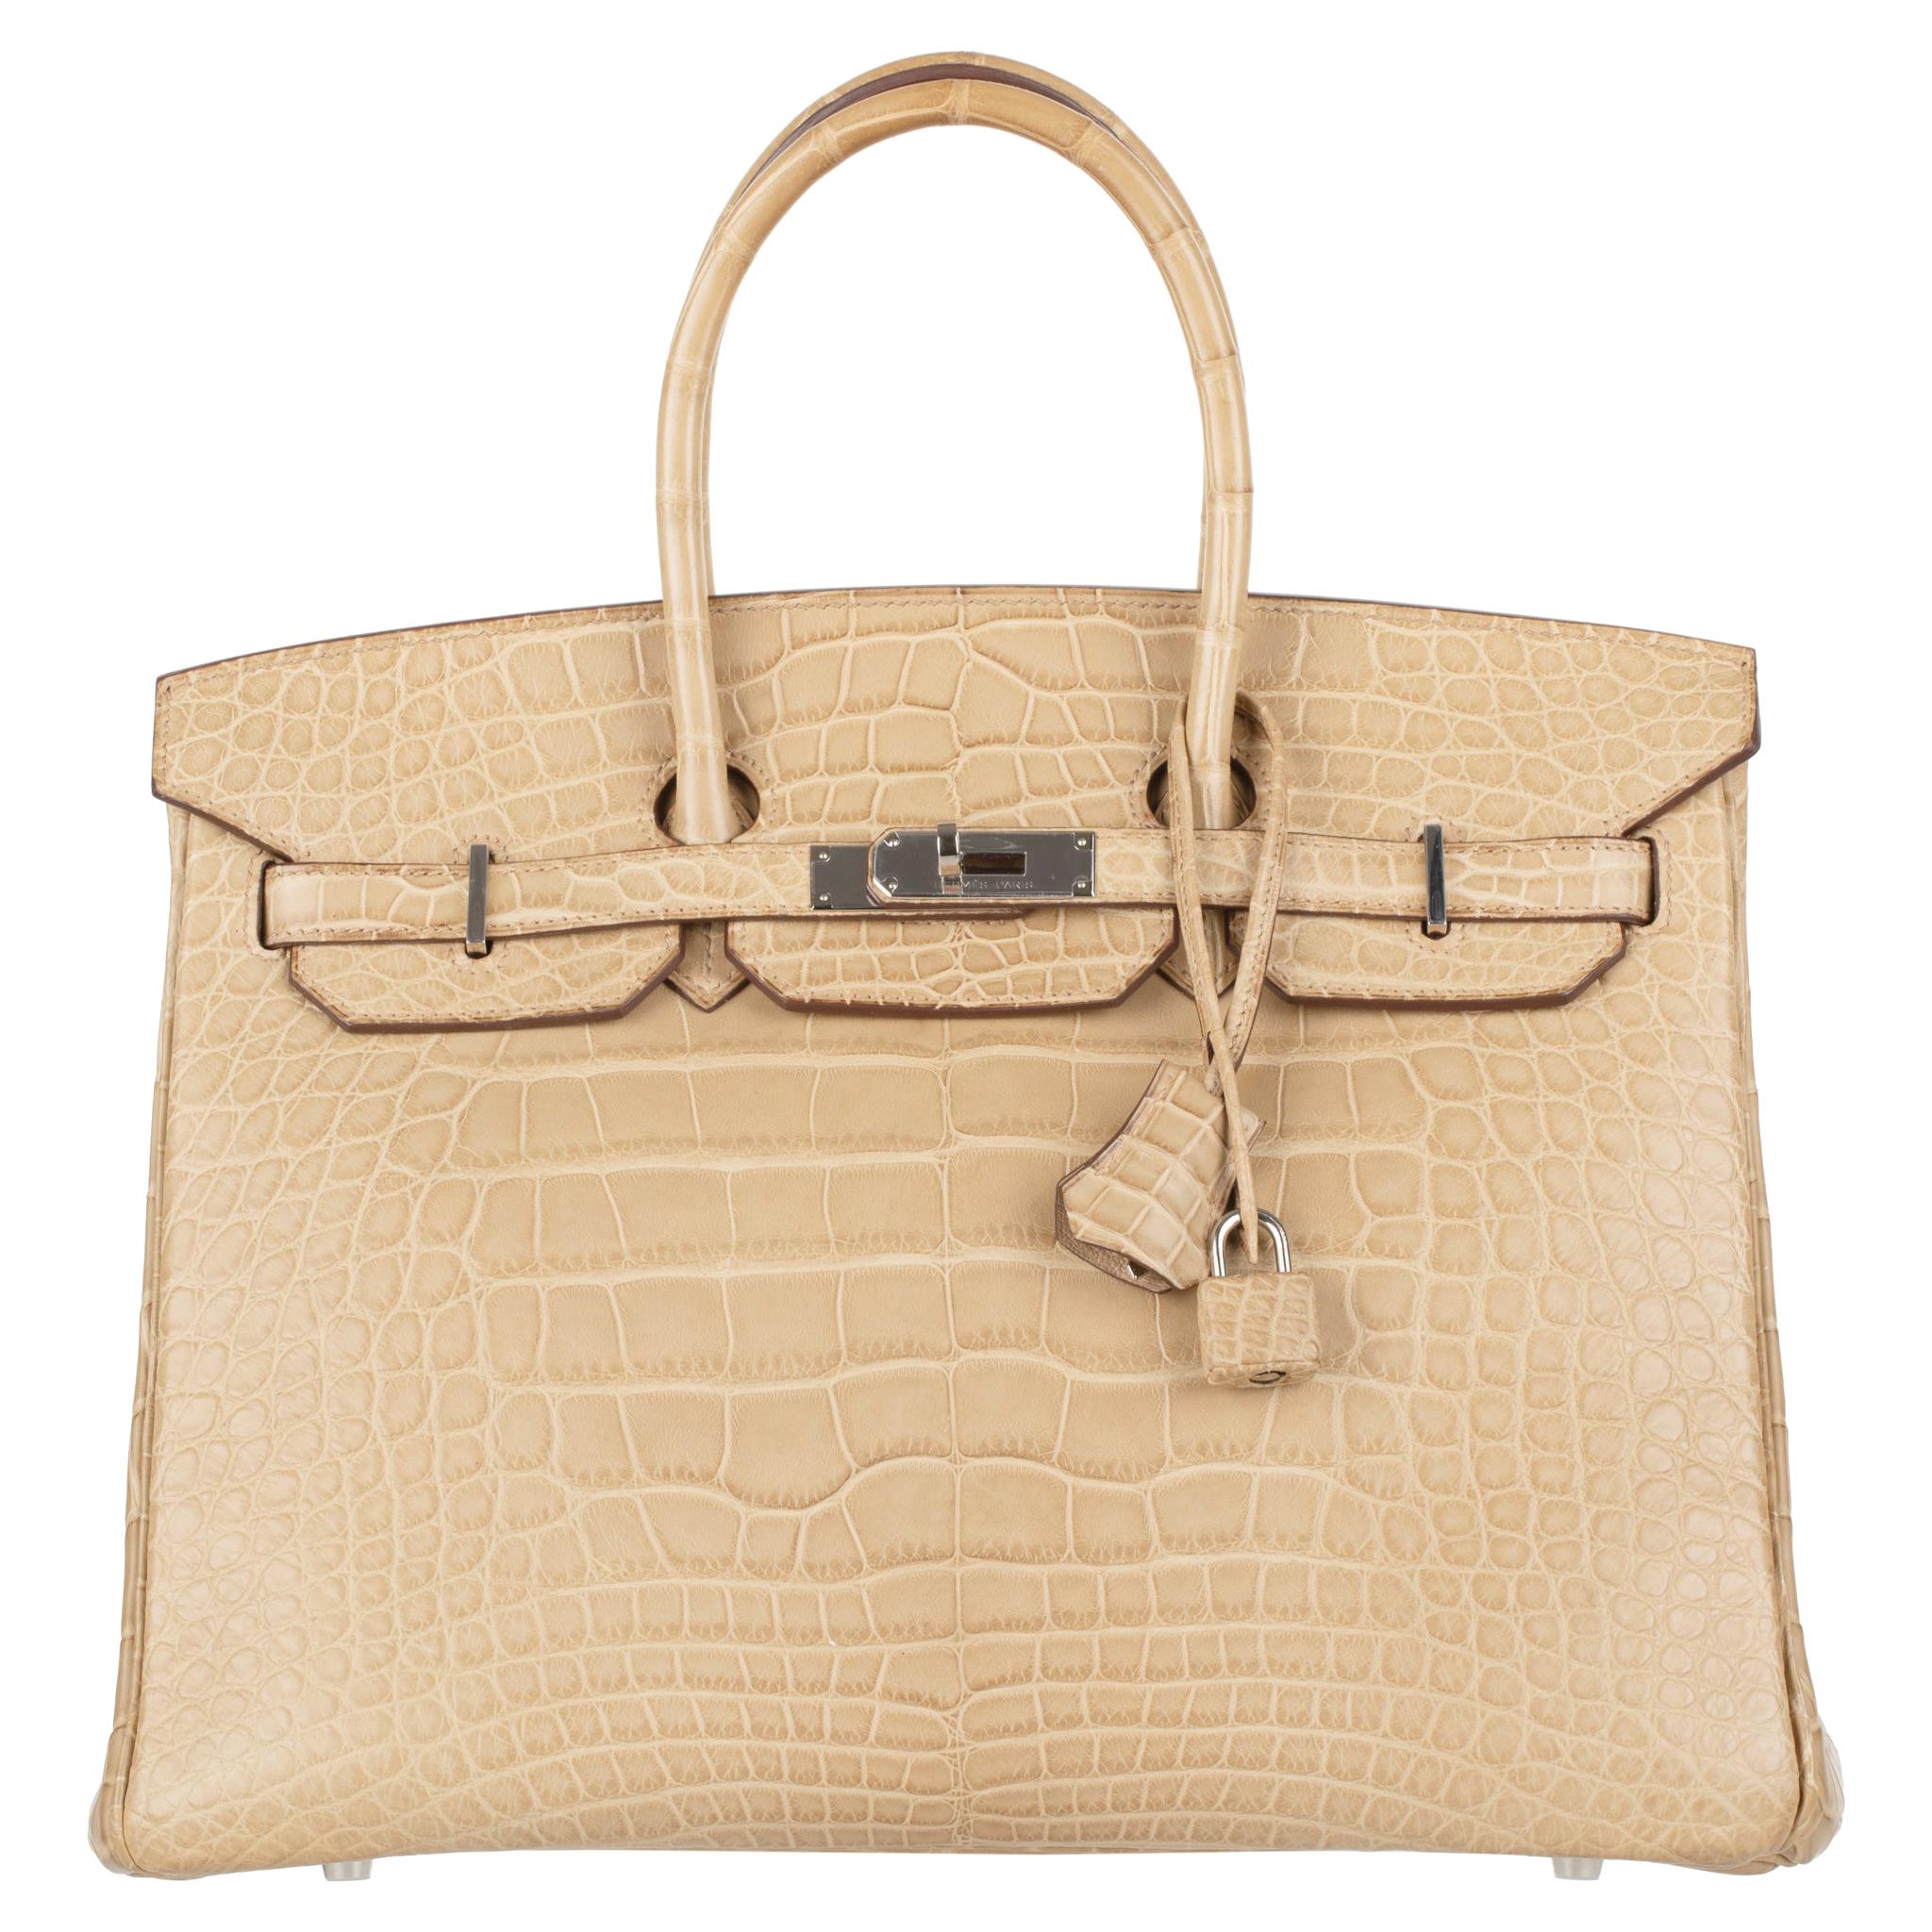 1stdibs Exclusives From Three Over Six

Brand: Hermès 
Style: Birkin 
Size: 35cm
Color: Matte Alligator
Hardware: Palladium
Stamp: 2011 P

Condition: Vintage excellent: This item is vintage and shows natural signs of ageing. This item will also have